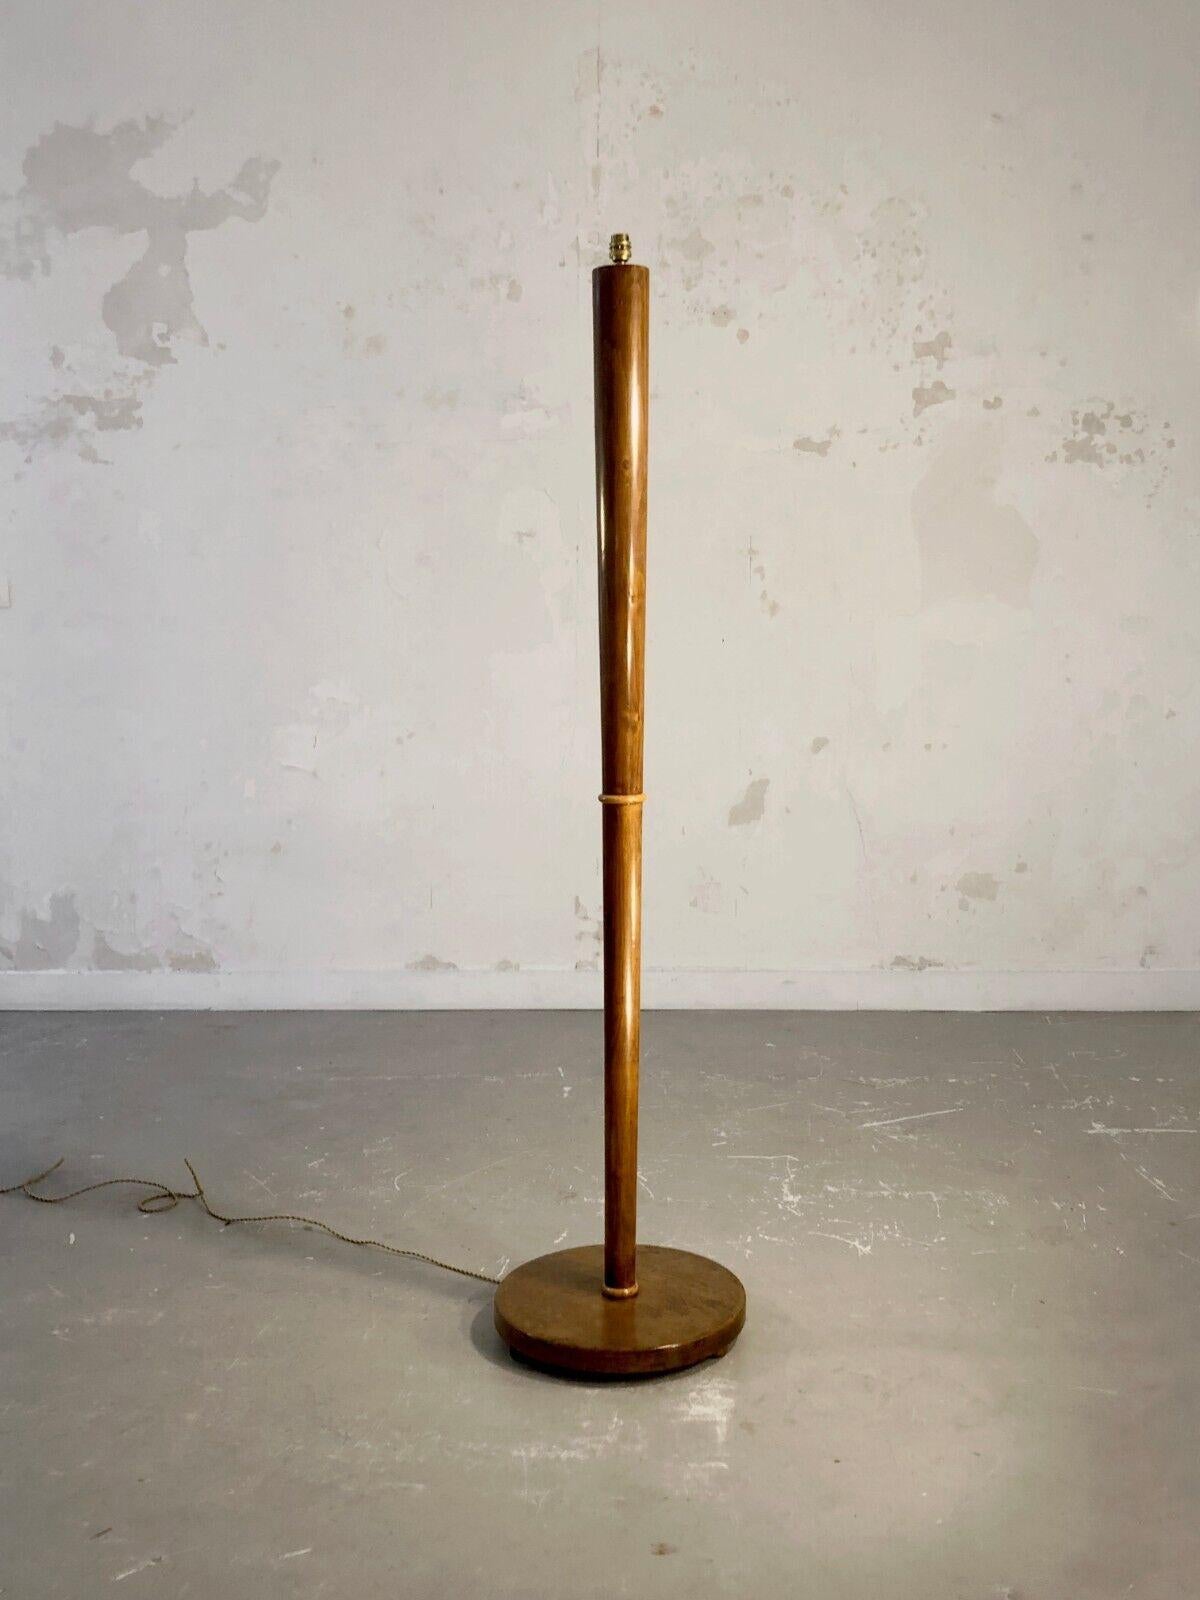 AN ART-DECO MODERNIST Wooden FLOOR LAMP in CHARLES DUDOUYT Style, France 1930 For Sale 3